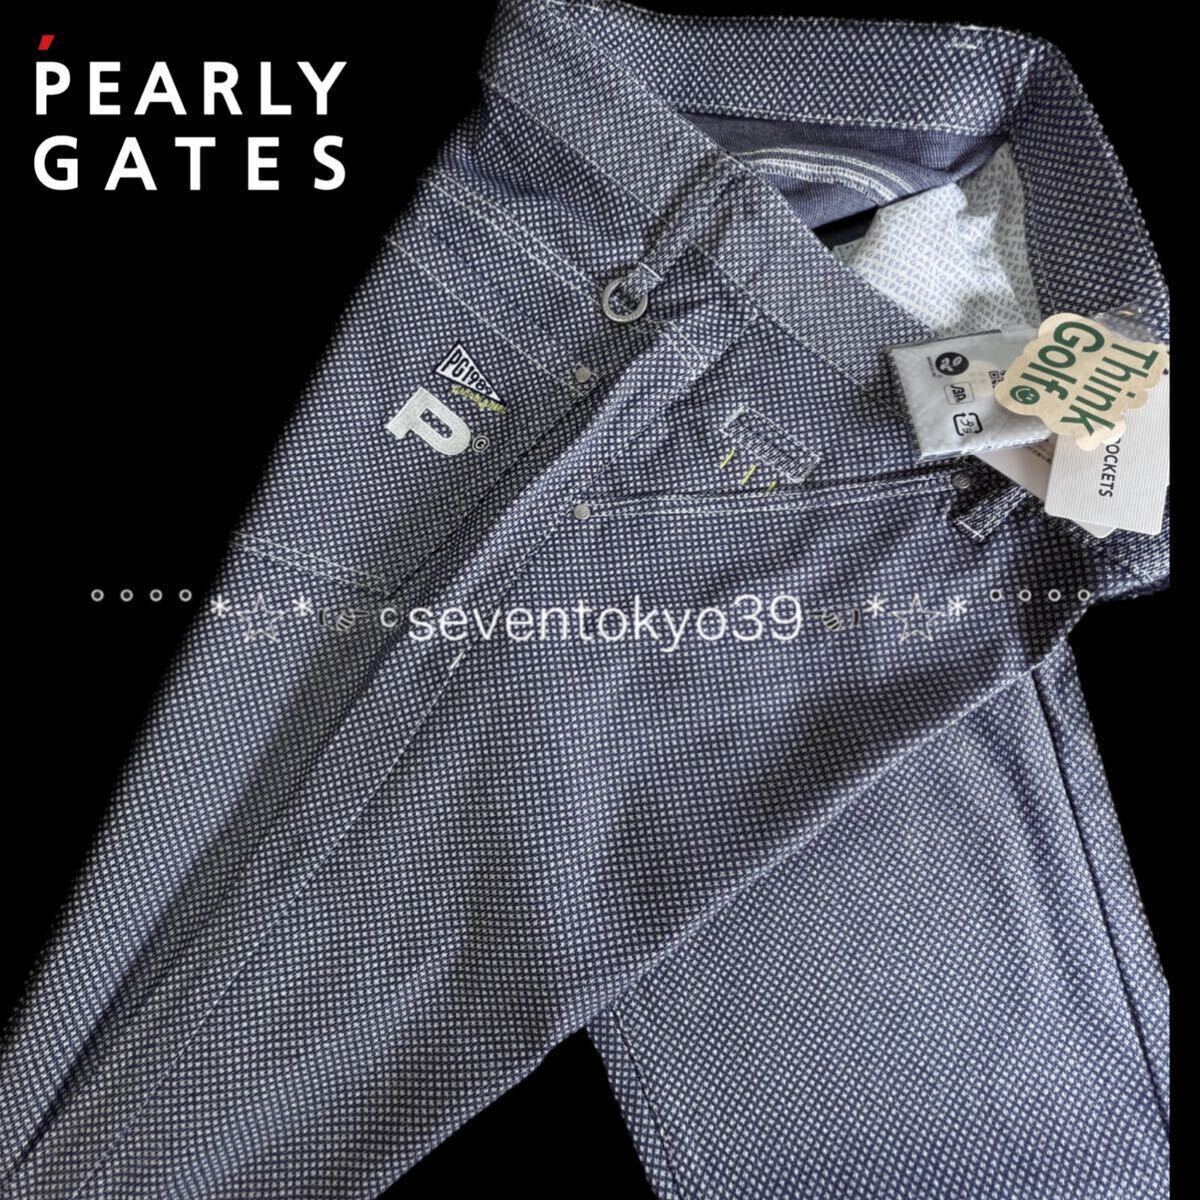  new arrival genuine article new goods 40901205 PEARLY GATES Pearly Gates /5( size L) super popular stretch dot do Be pants ventilation . aqueous Sara Sara 